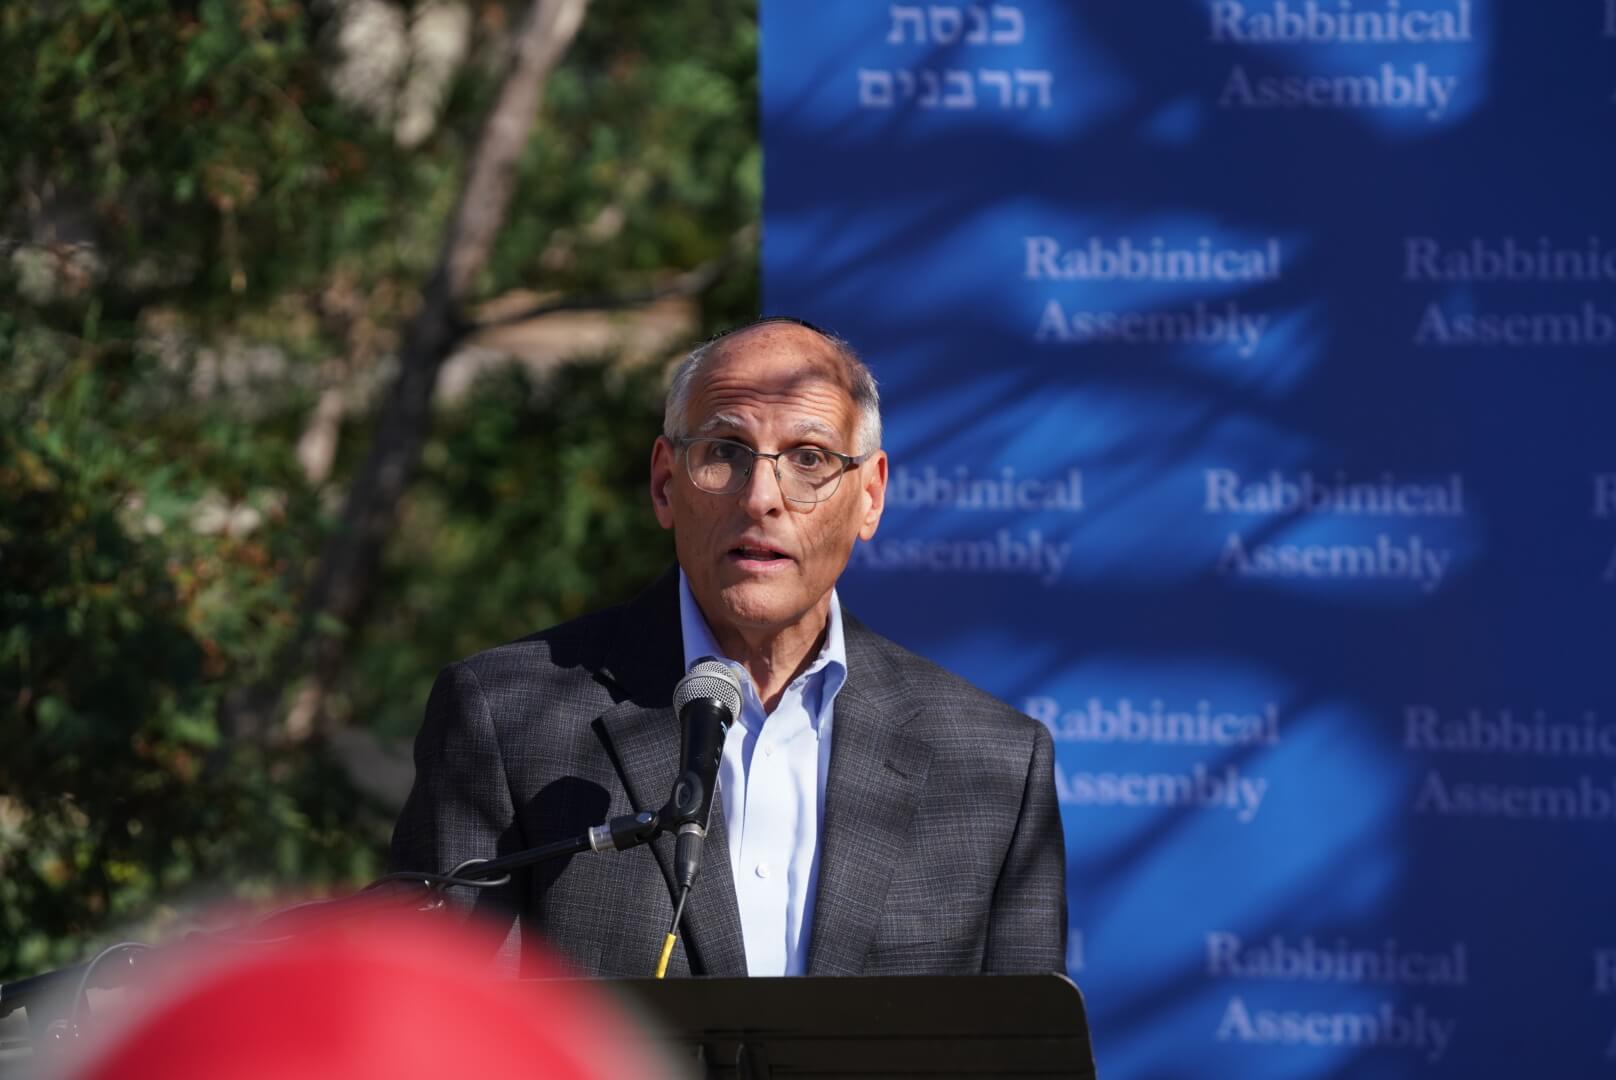 Rabbi Harold Kravitz, president of the Rabbinical Assembly, has called for a respectful dialogue about intermarriage among the 1,700 Conservative rabbis that are members of the association.